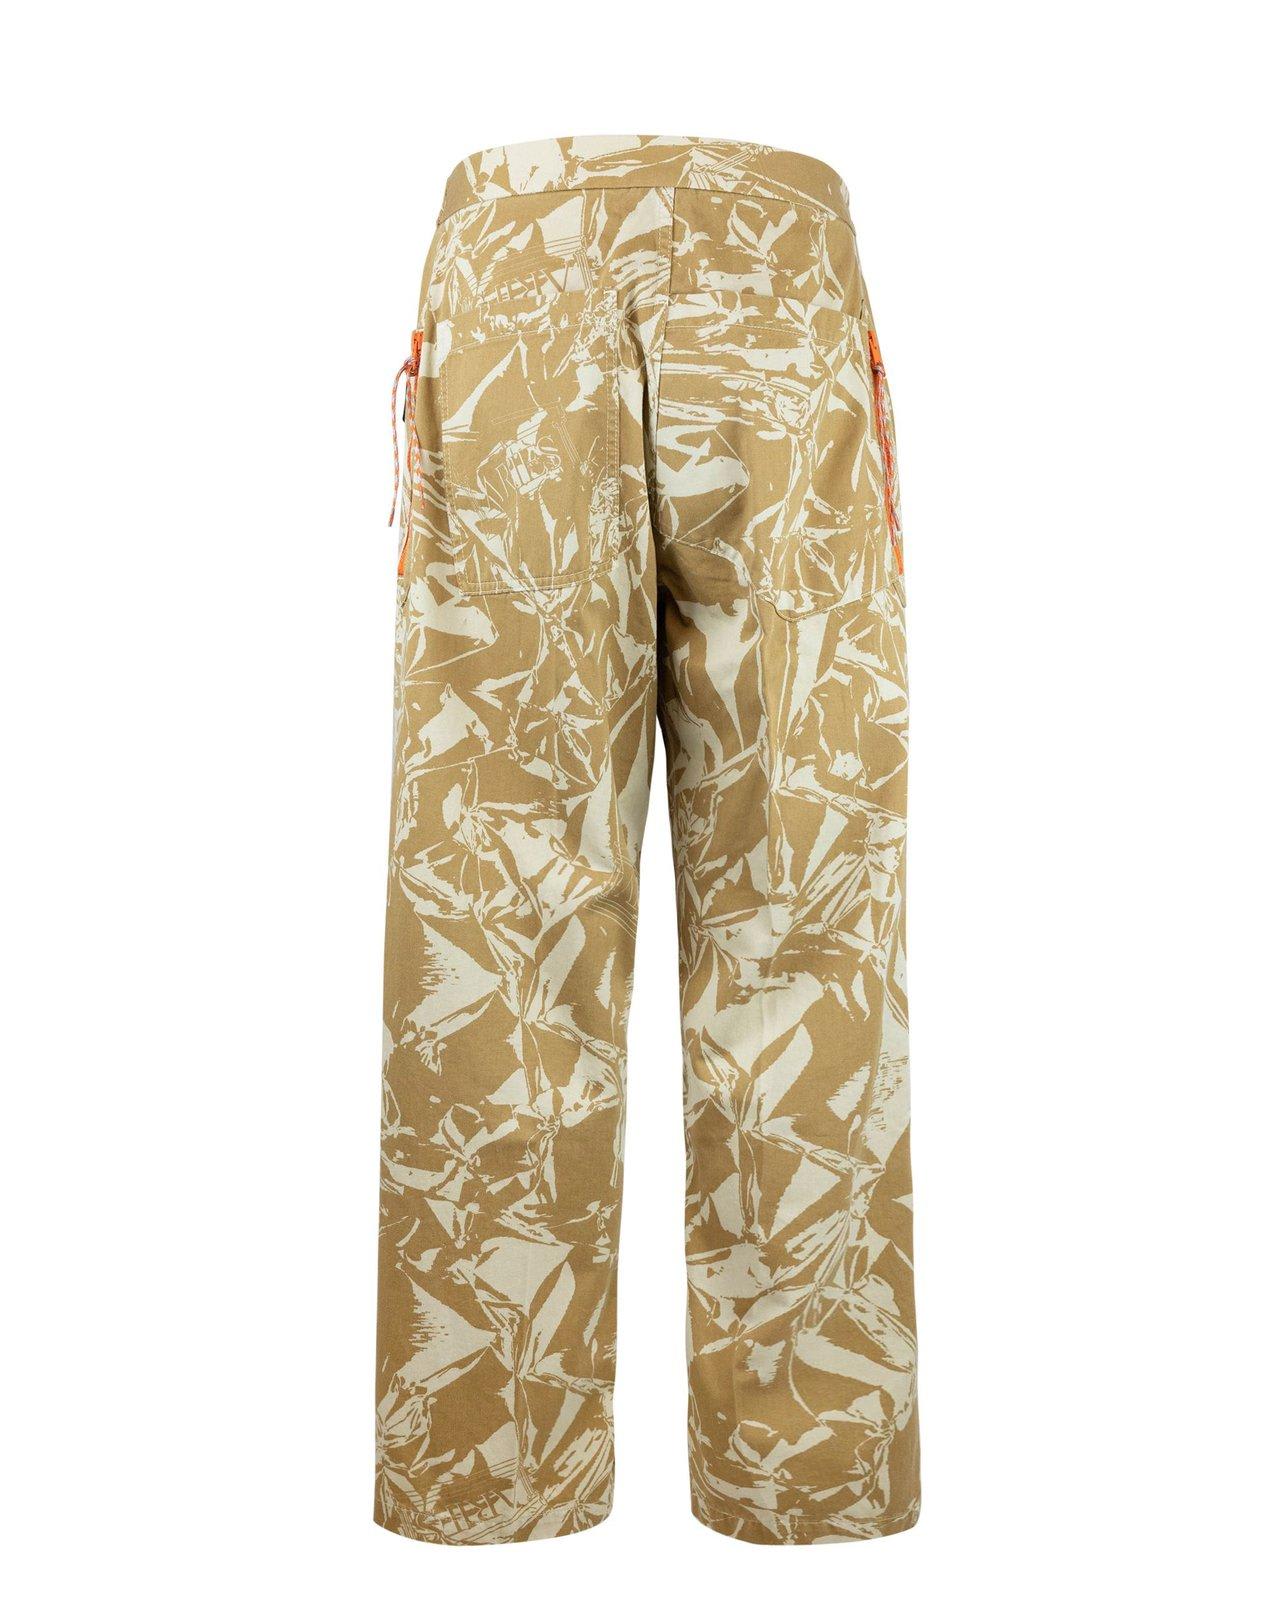 Shop Aries Camouflage Printed Cargo Pants